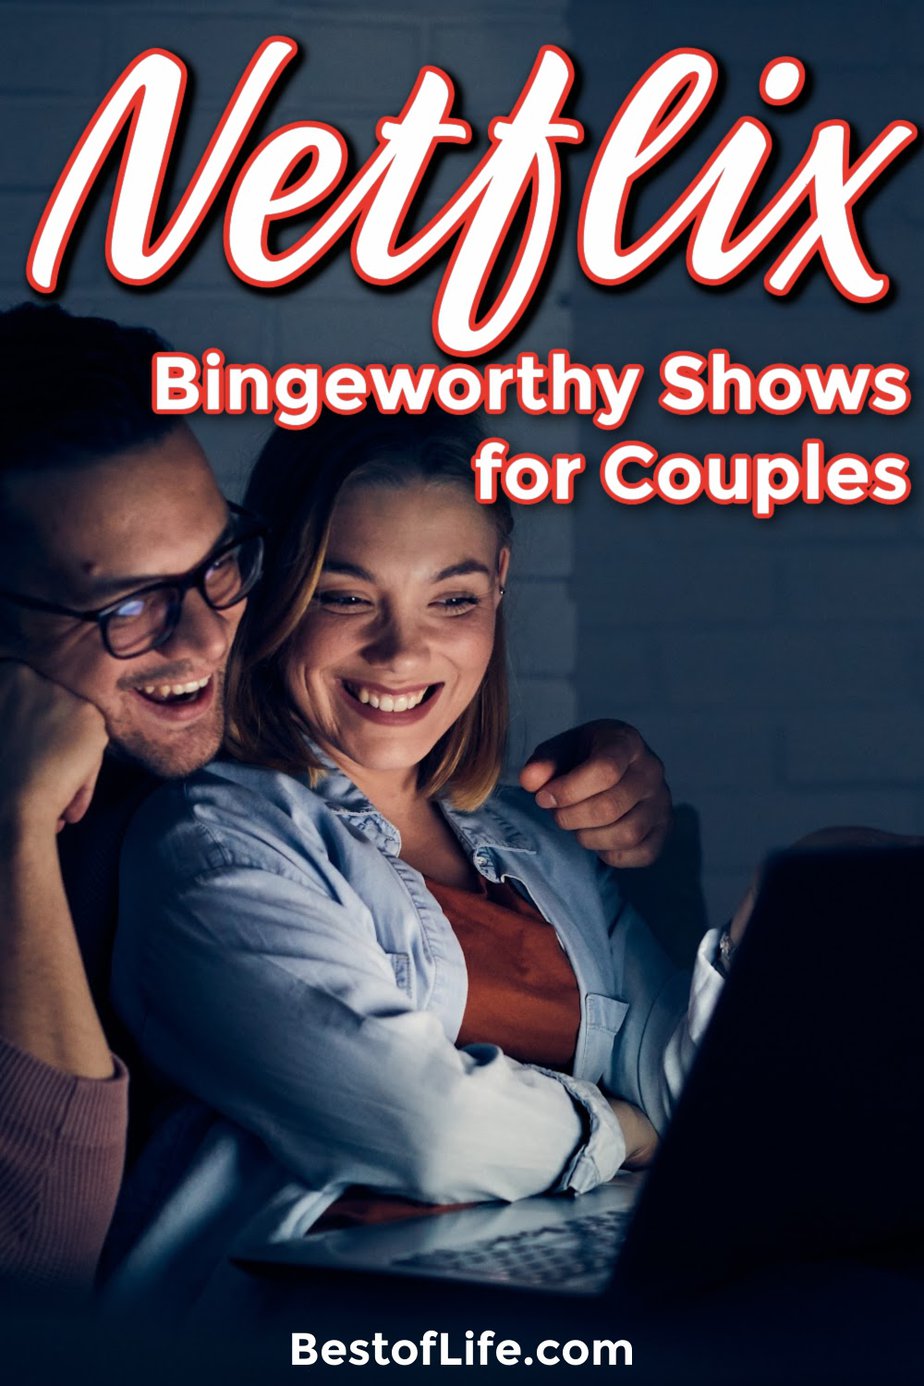 When you know what the best Netflix shows to binge watch as a couple are you have the makings for the perfect date night. Netflix Shows for Date Night | Date Night Ideas | What to Watch as a Couple | Streaming Shows for Couples | Romance Shows on Netflix | Tips for Date Night | Things to do as a Couple #netflix #datenight via @thebestoflife